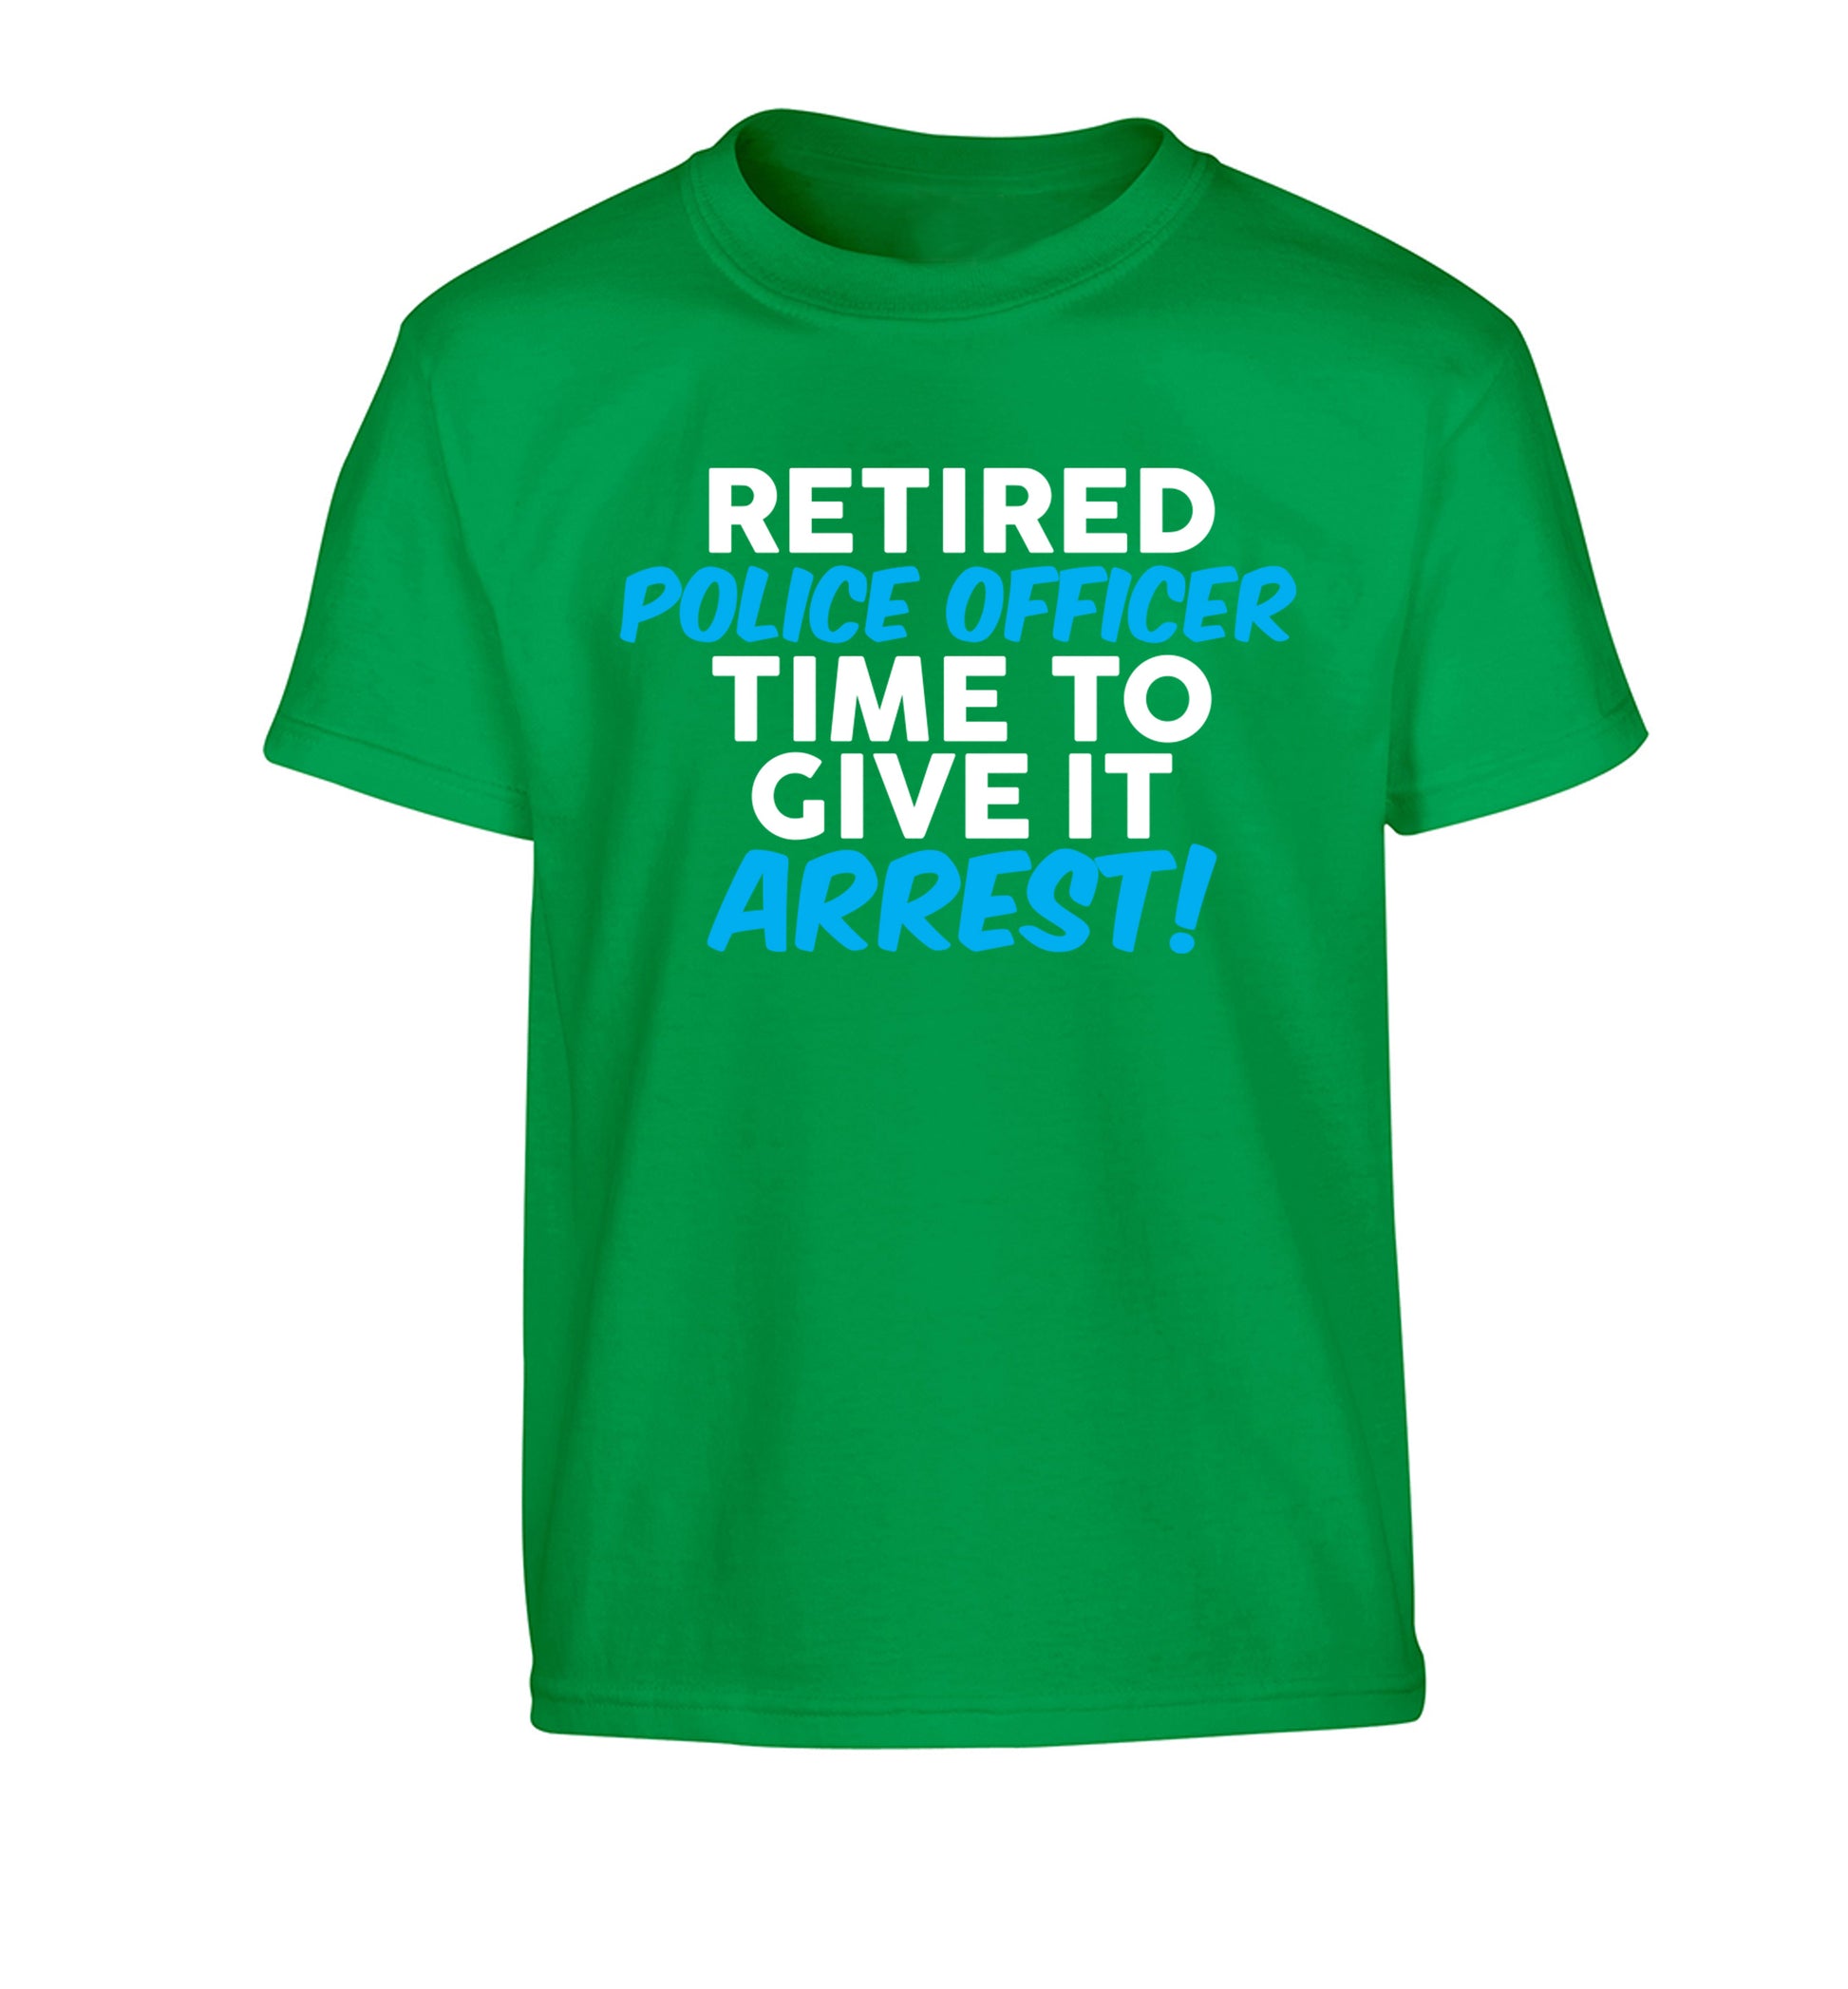 Retired police officer time to give it arrest Children's green Tshirt 12-13 Years